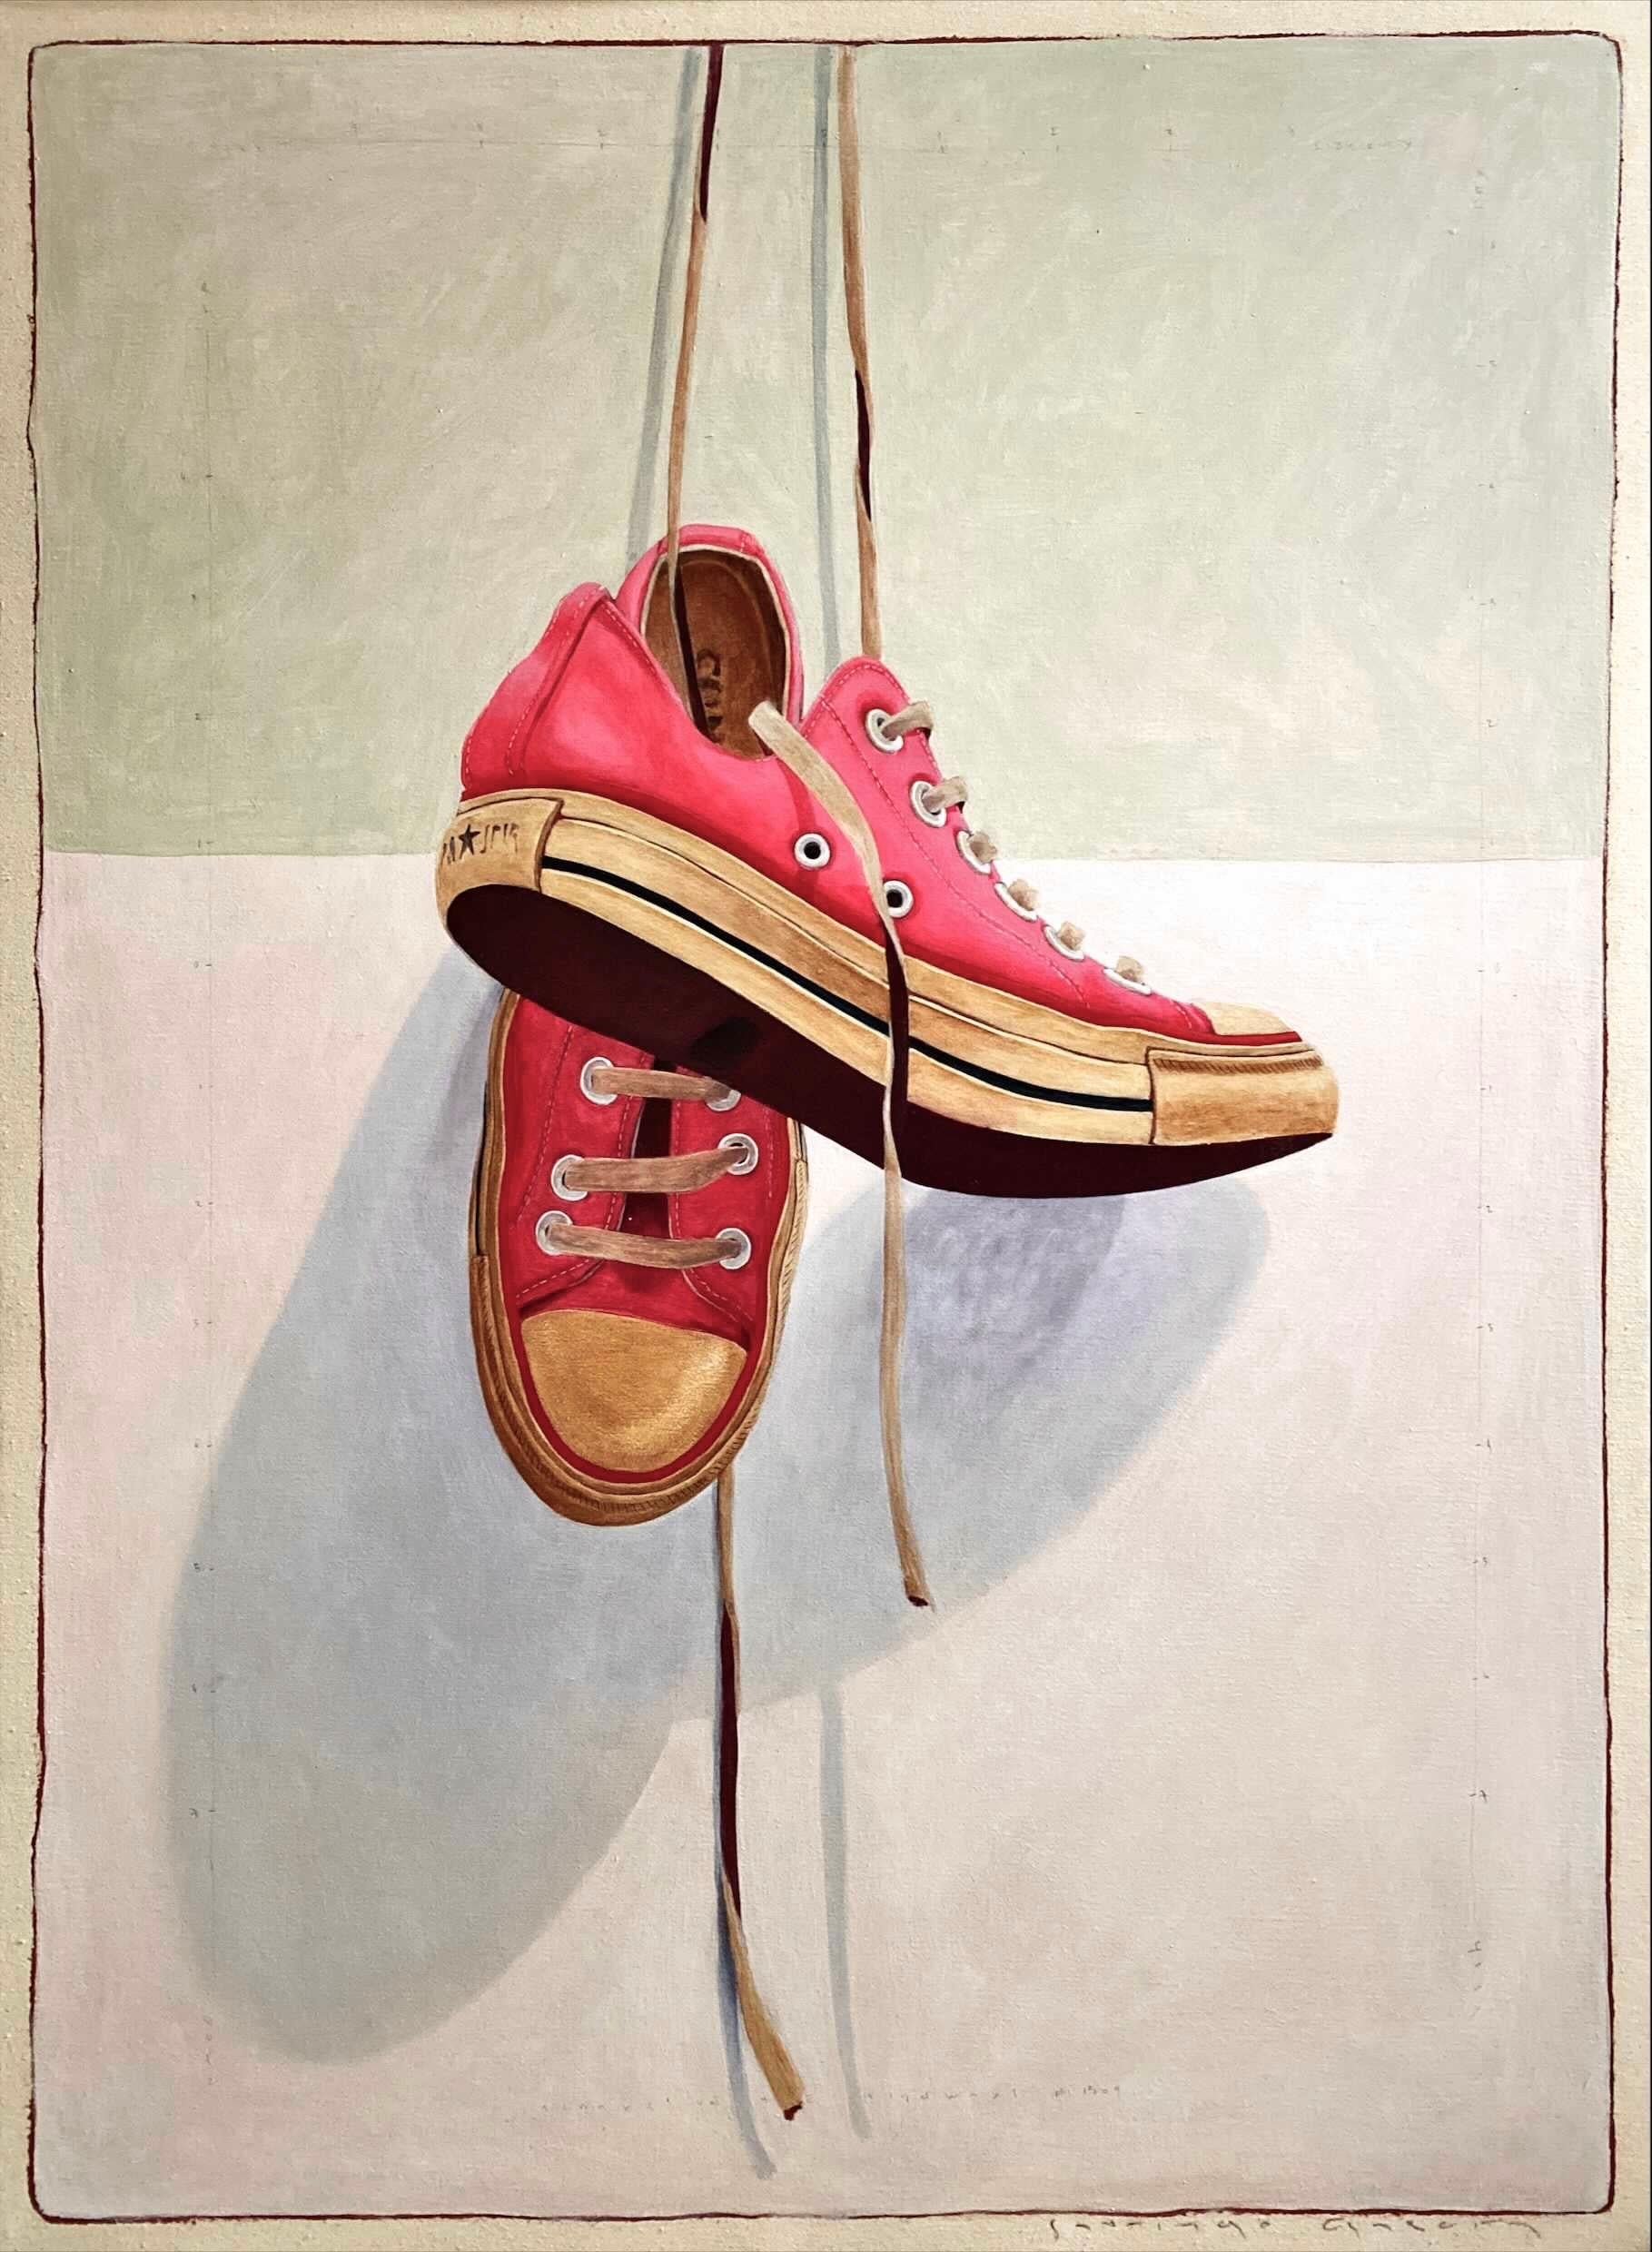 Santiago Garcia Still-Life Painting - "#1504" photorealistic oil painting of pink converse sneakers